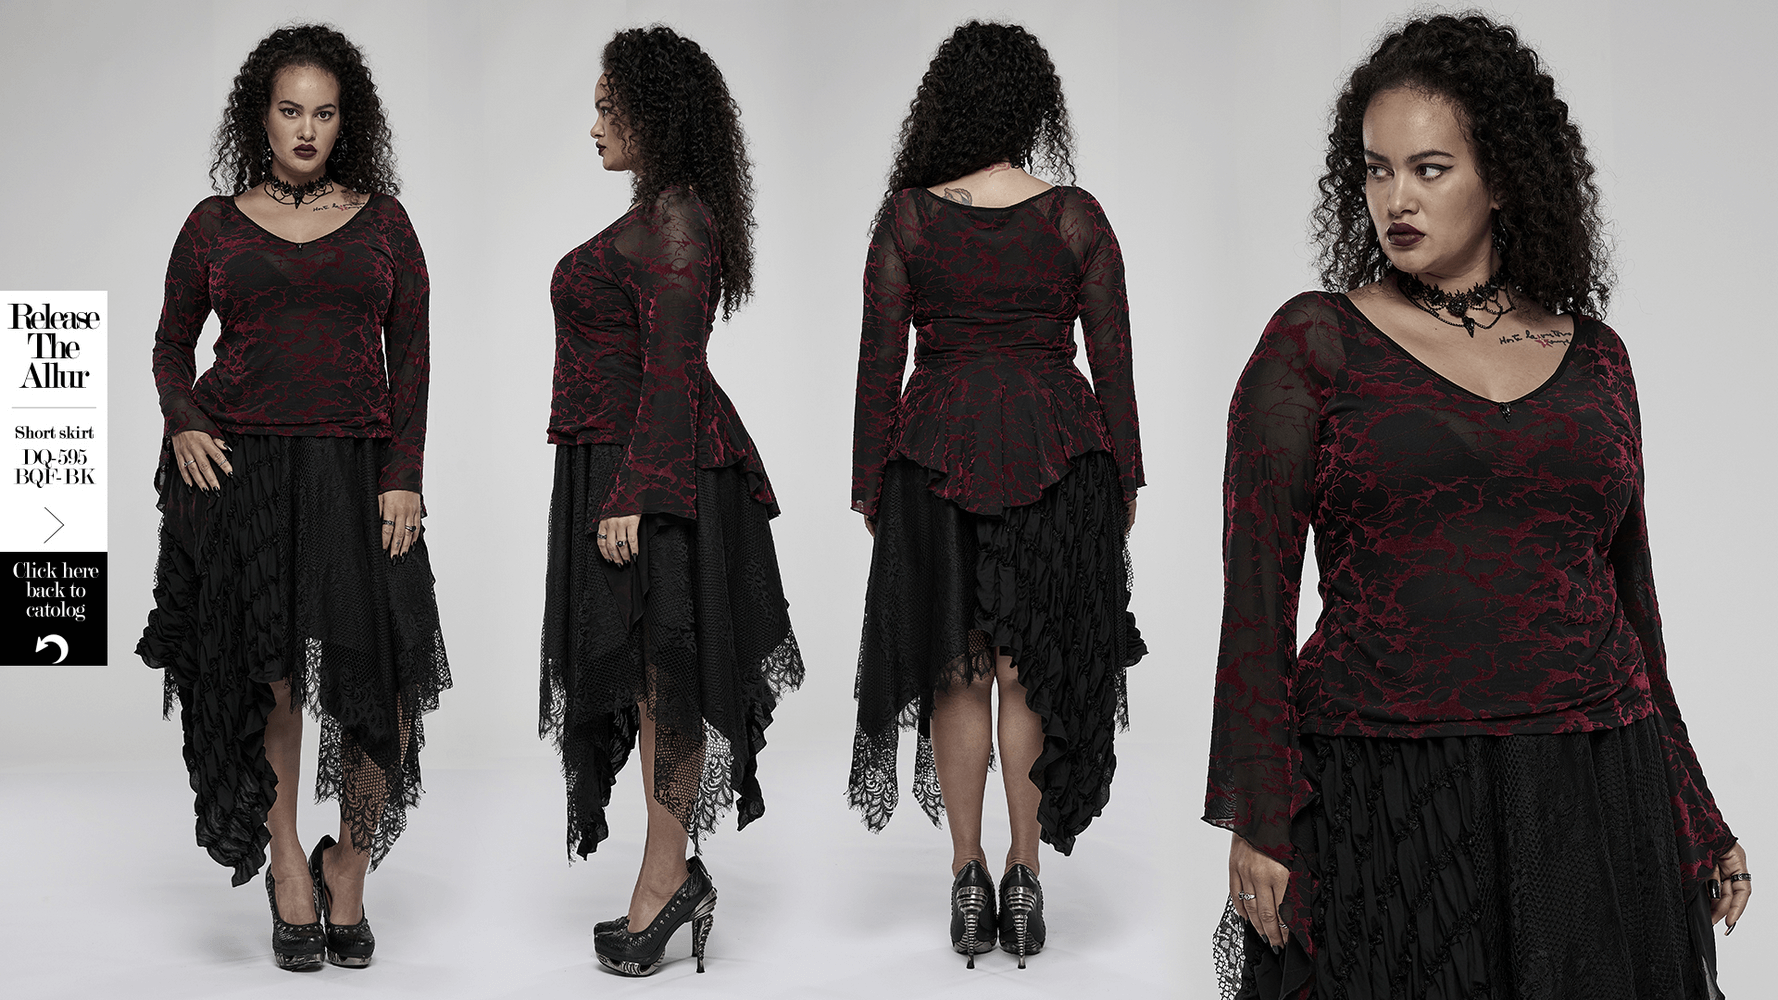 Scarlet Abstract V-Neck Mesh Goth Top for Women - HARD'N'HEAVY